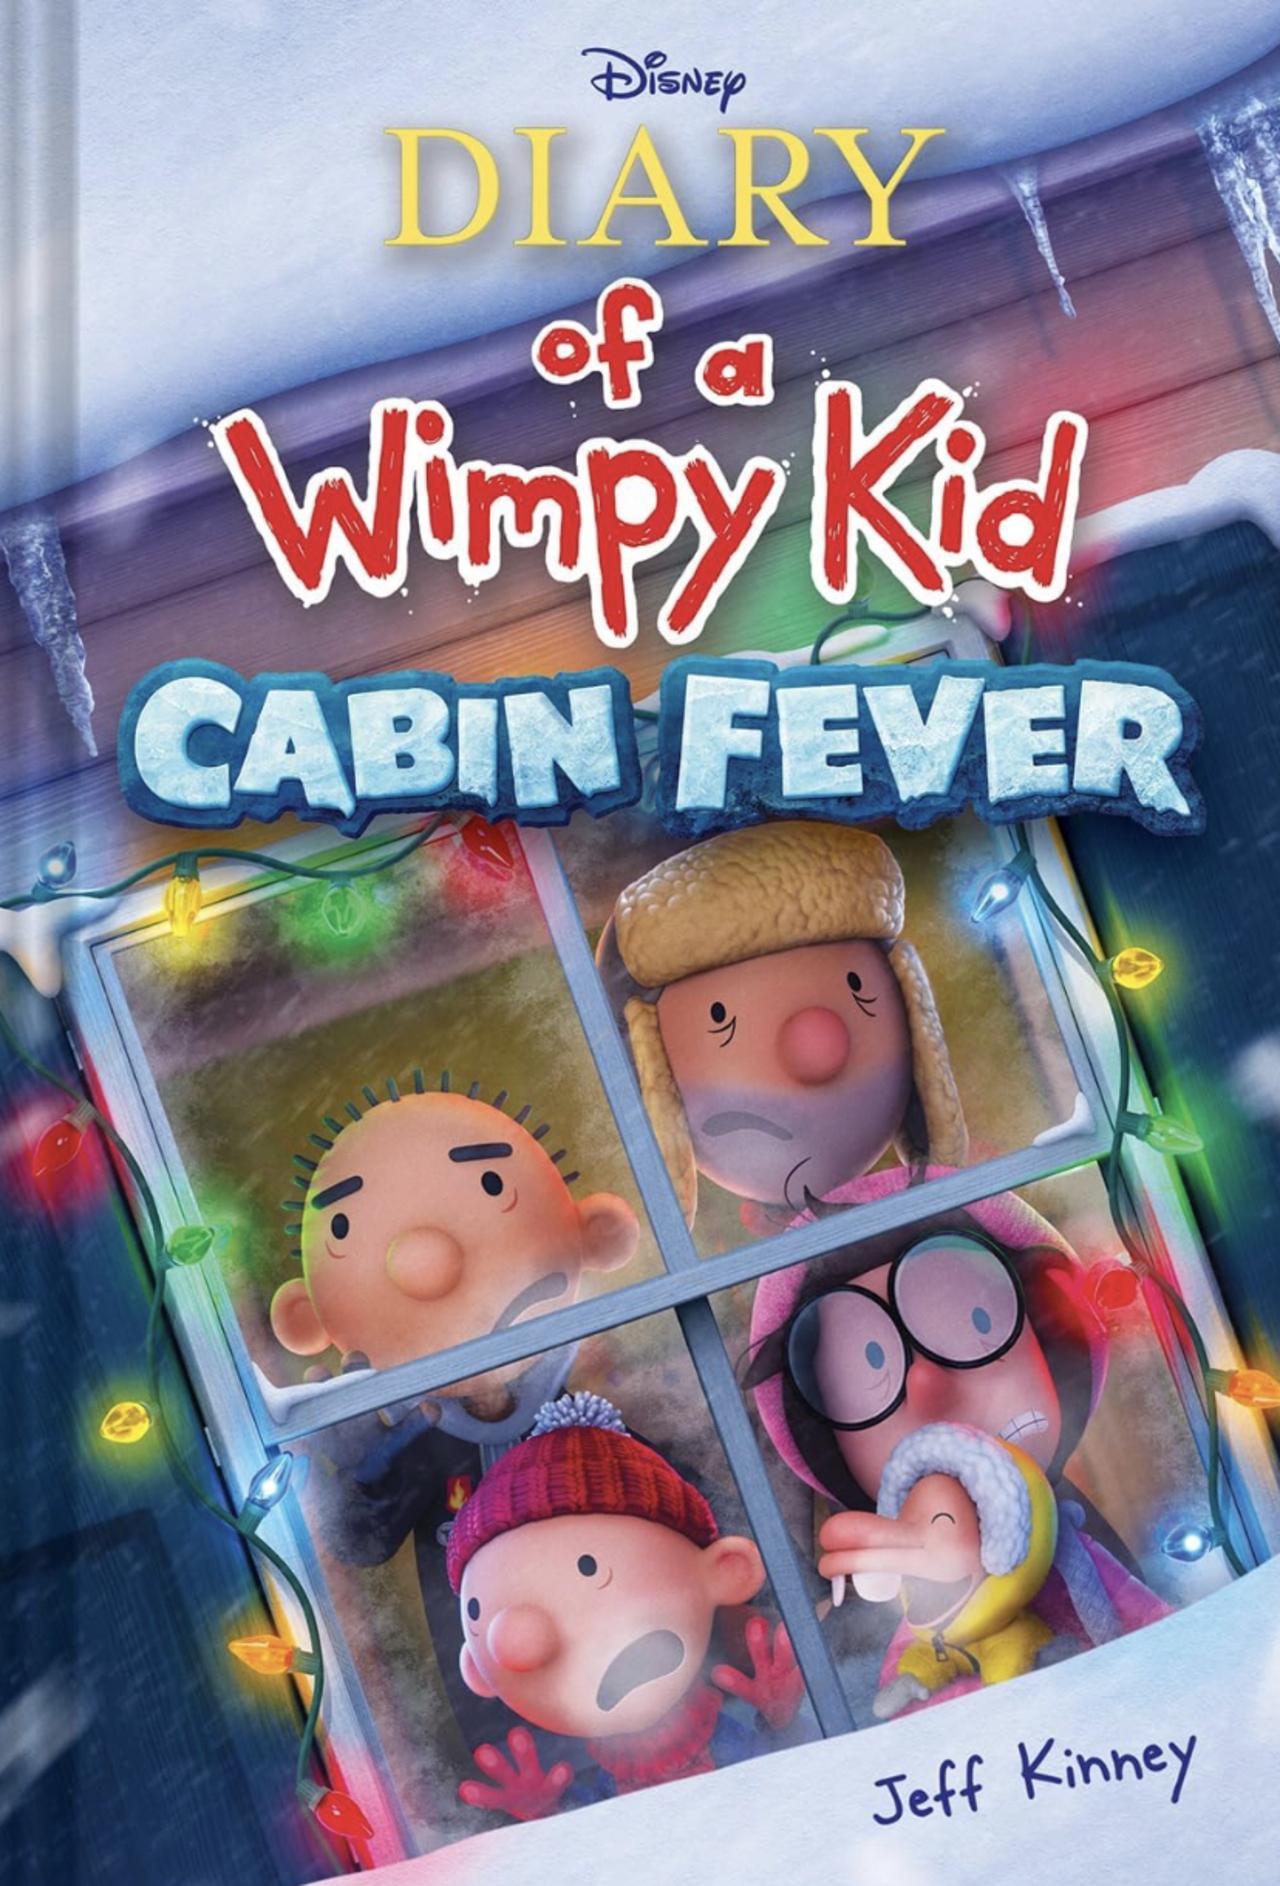 Diary of a Wimpy Kid Christmas: Cabin Fever is an animated film and the seventh installment in the Diary of a Wimpy Kid film series. it is scheduled to release on Disney+ on December 8, 2023